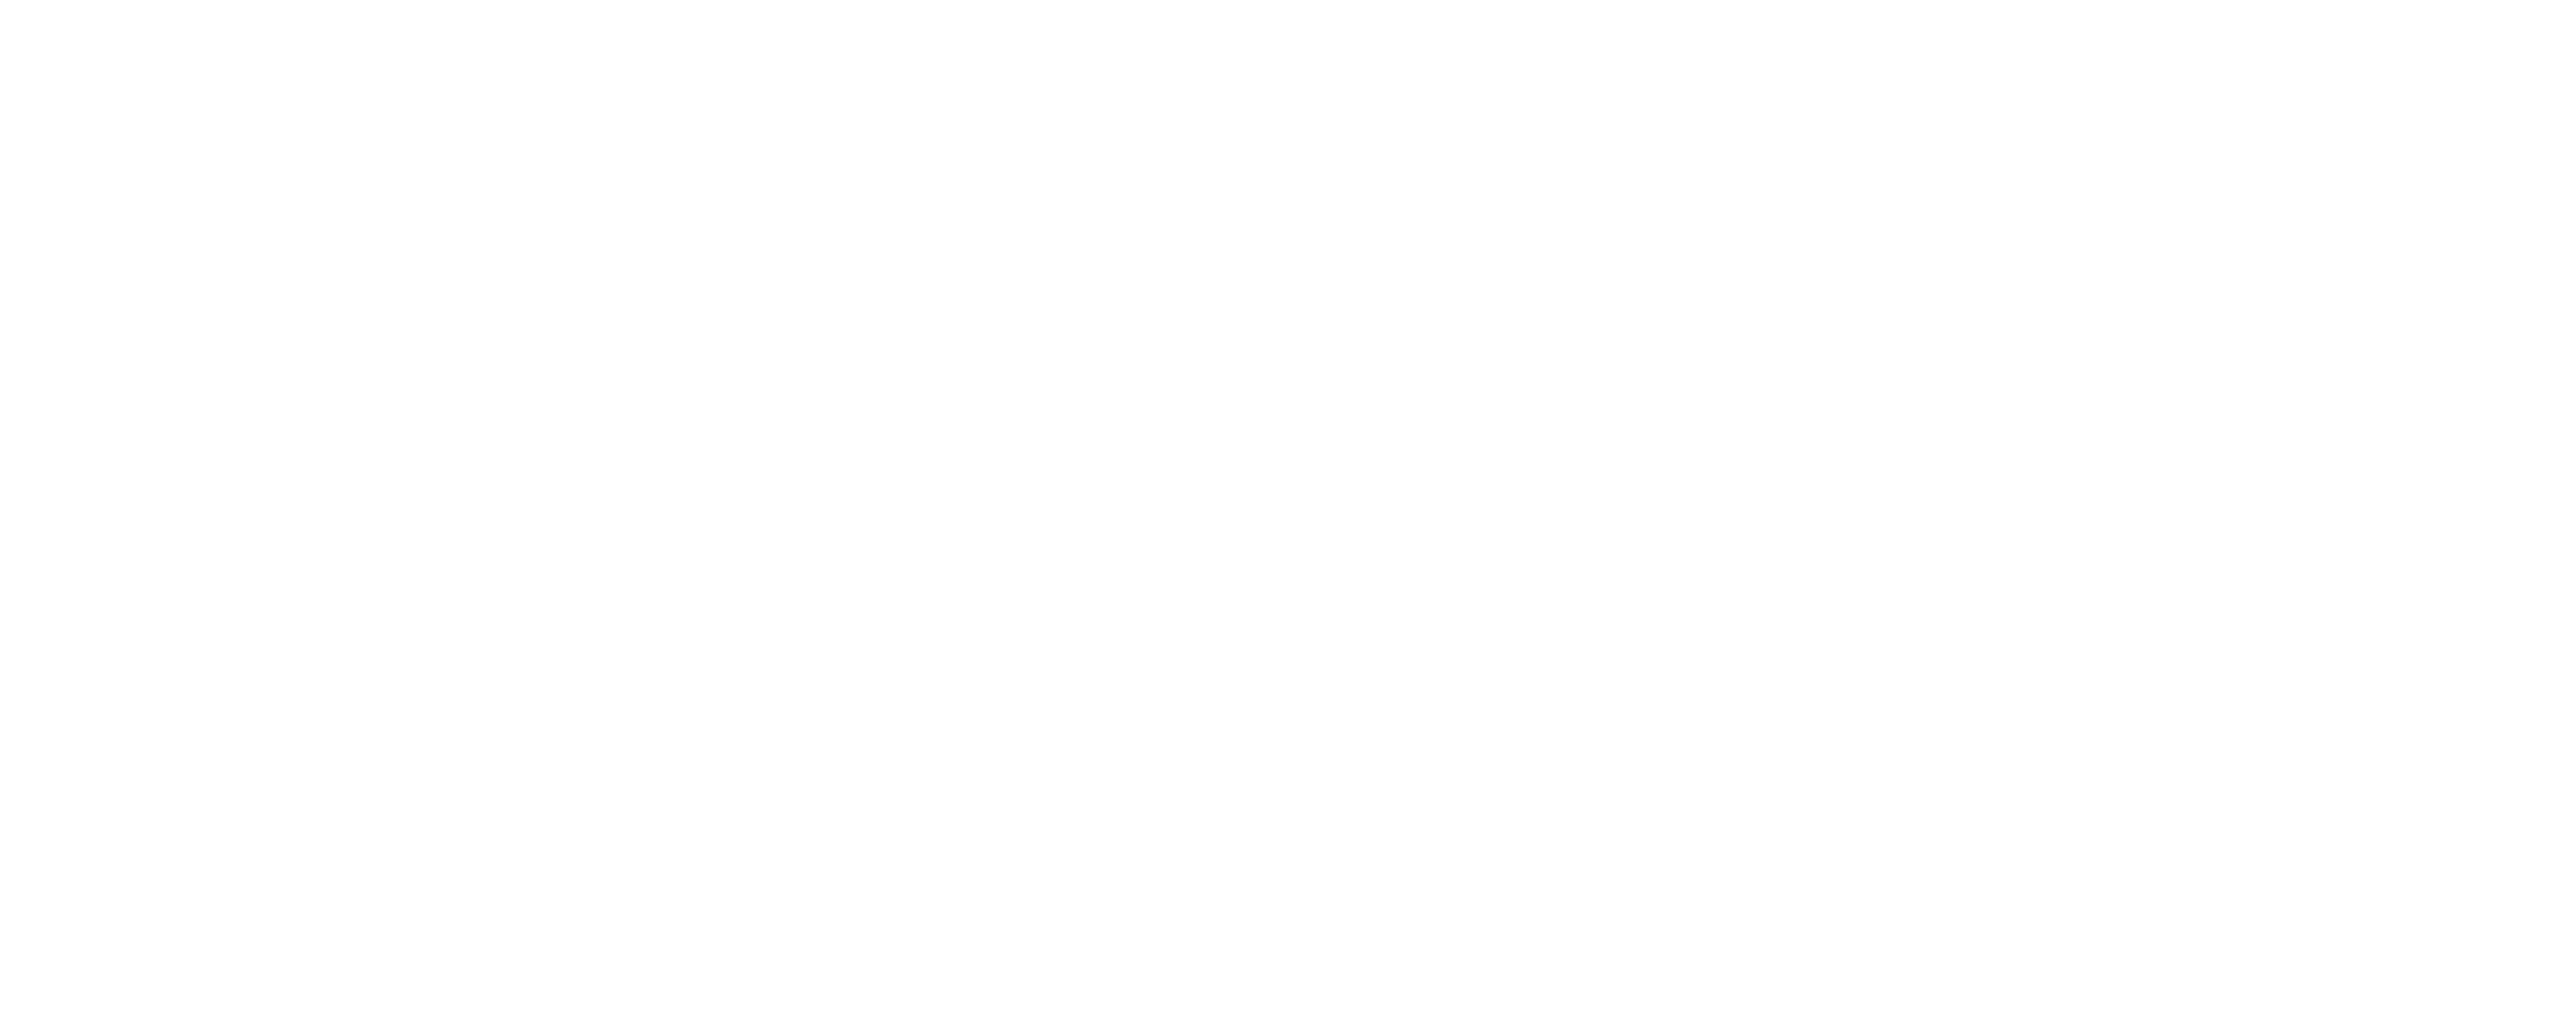 Architectural Encounters of Croatia and Hungary